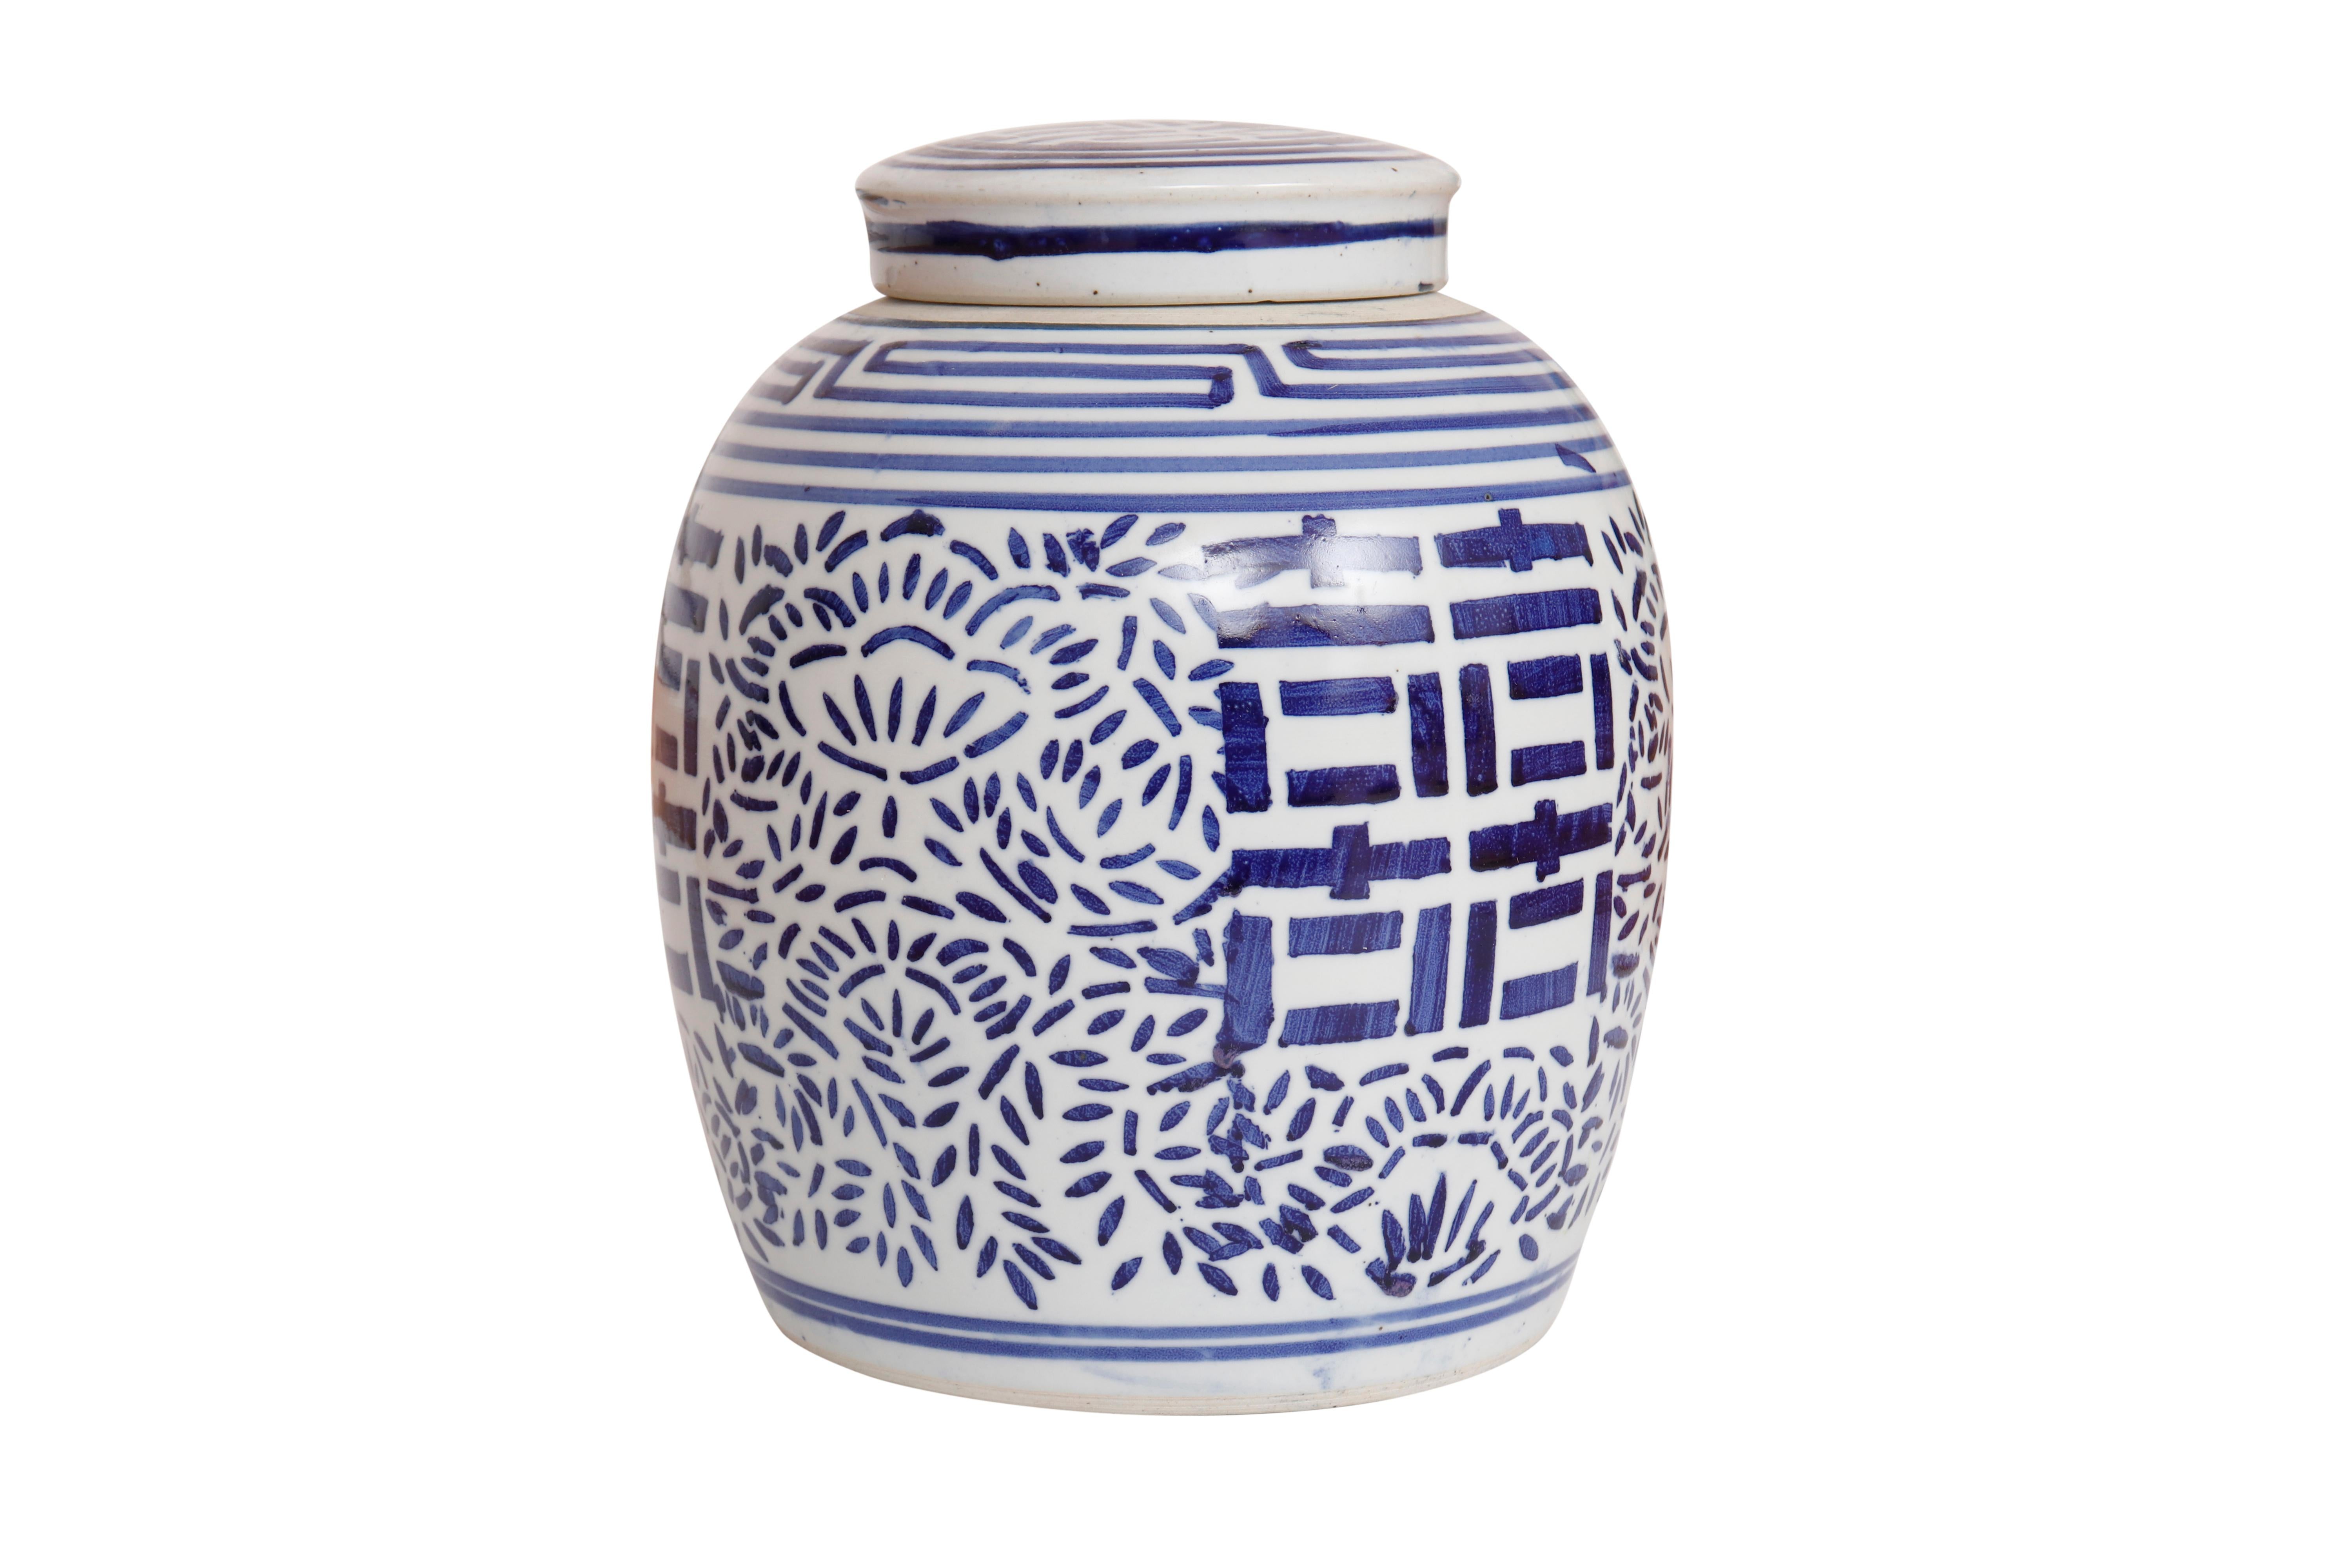 A blue and white Chinese ceramic ginger jar with matching lid. Hand painted with the double happiness symbol framed with a floral motif in bold cobalt blue.